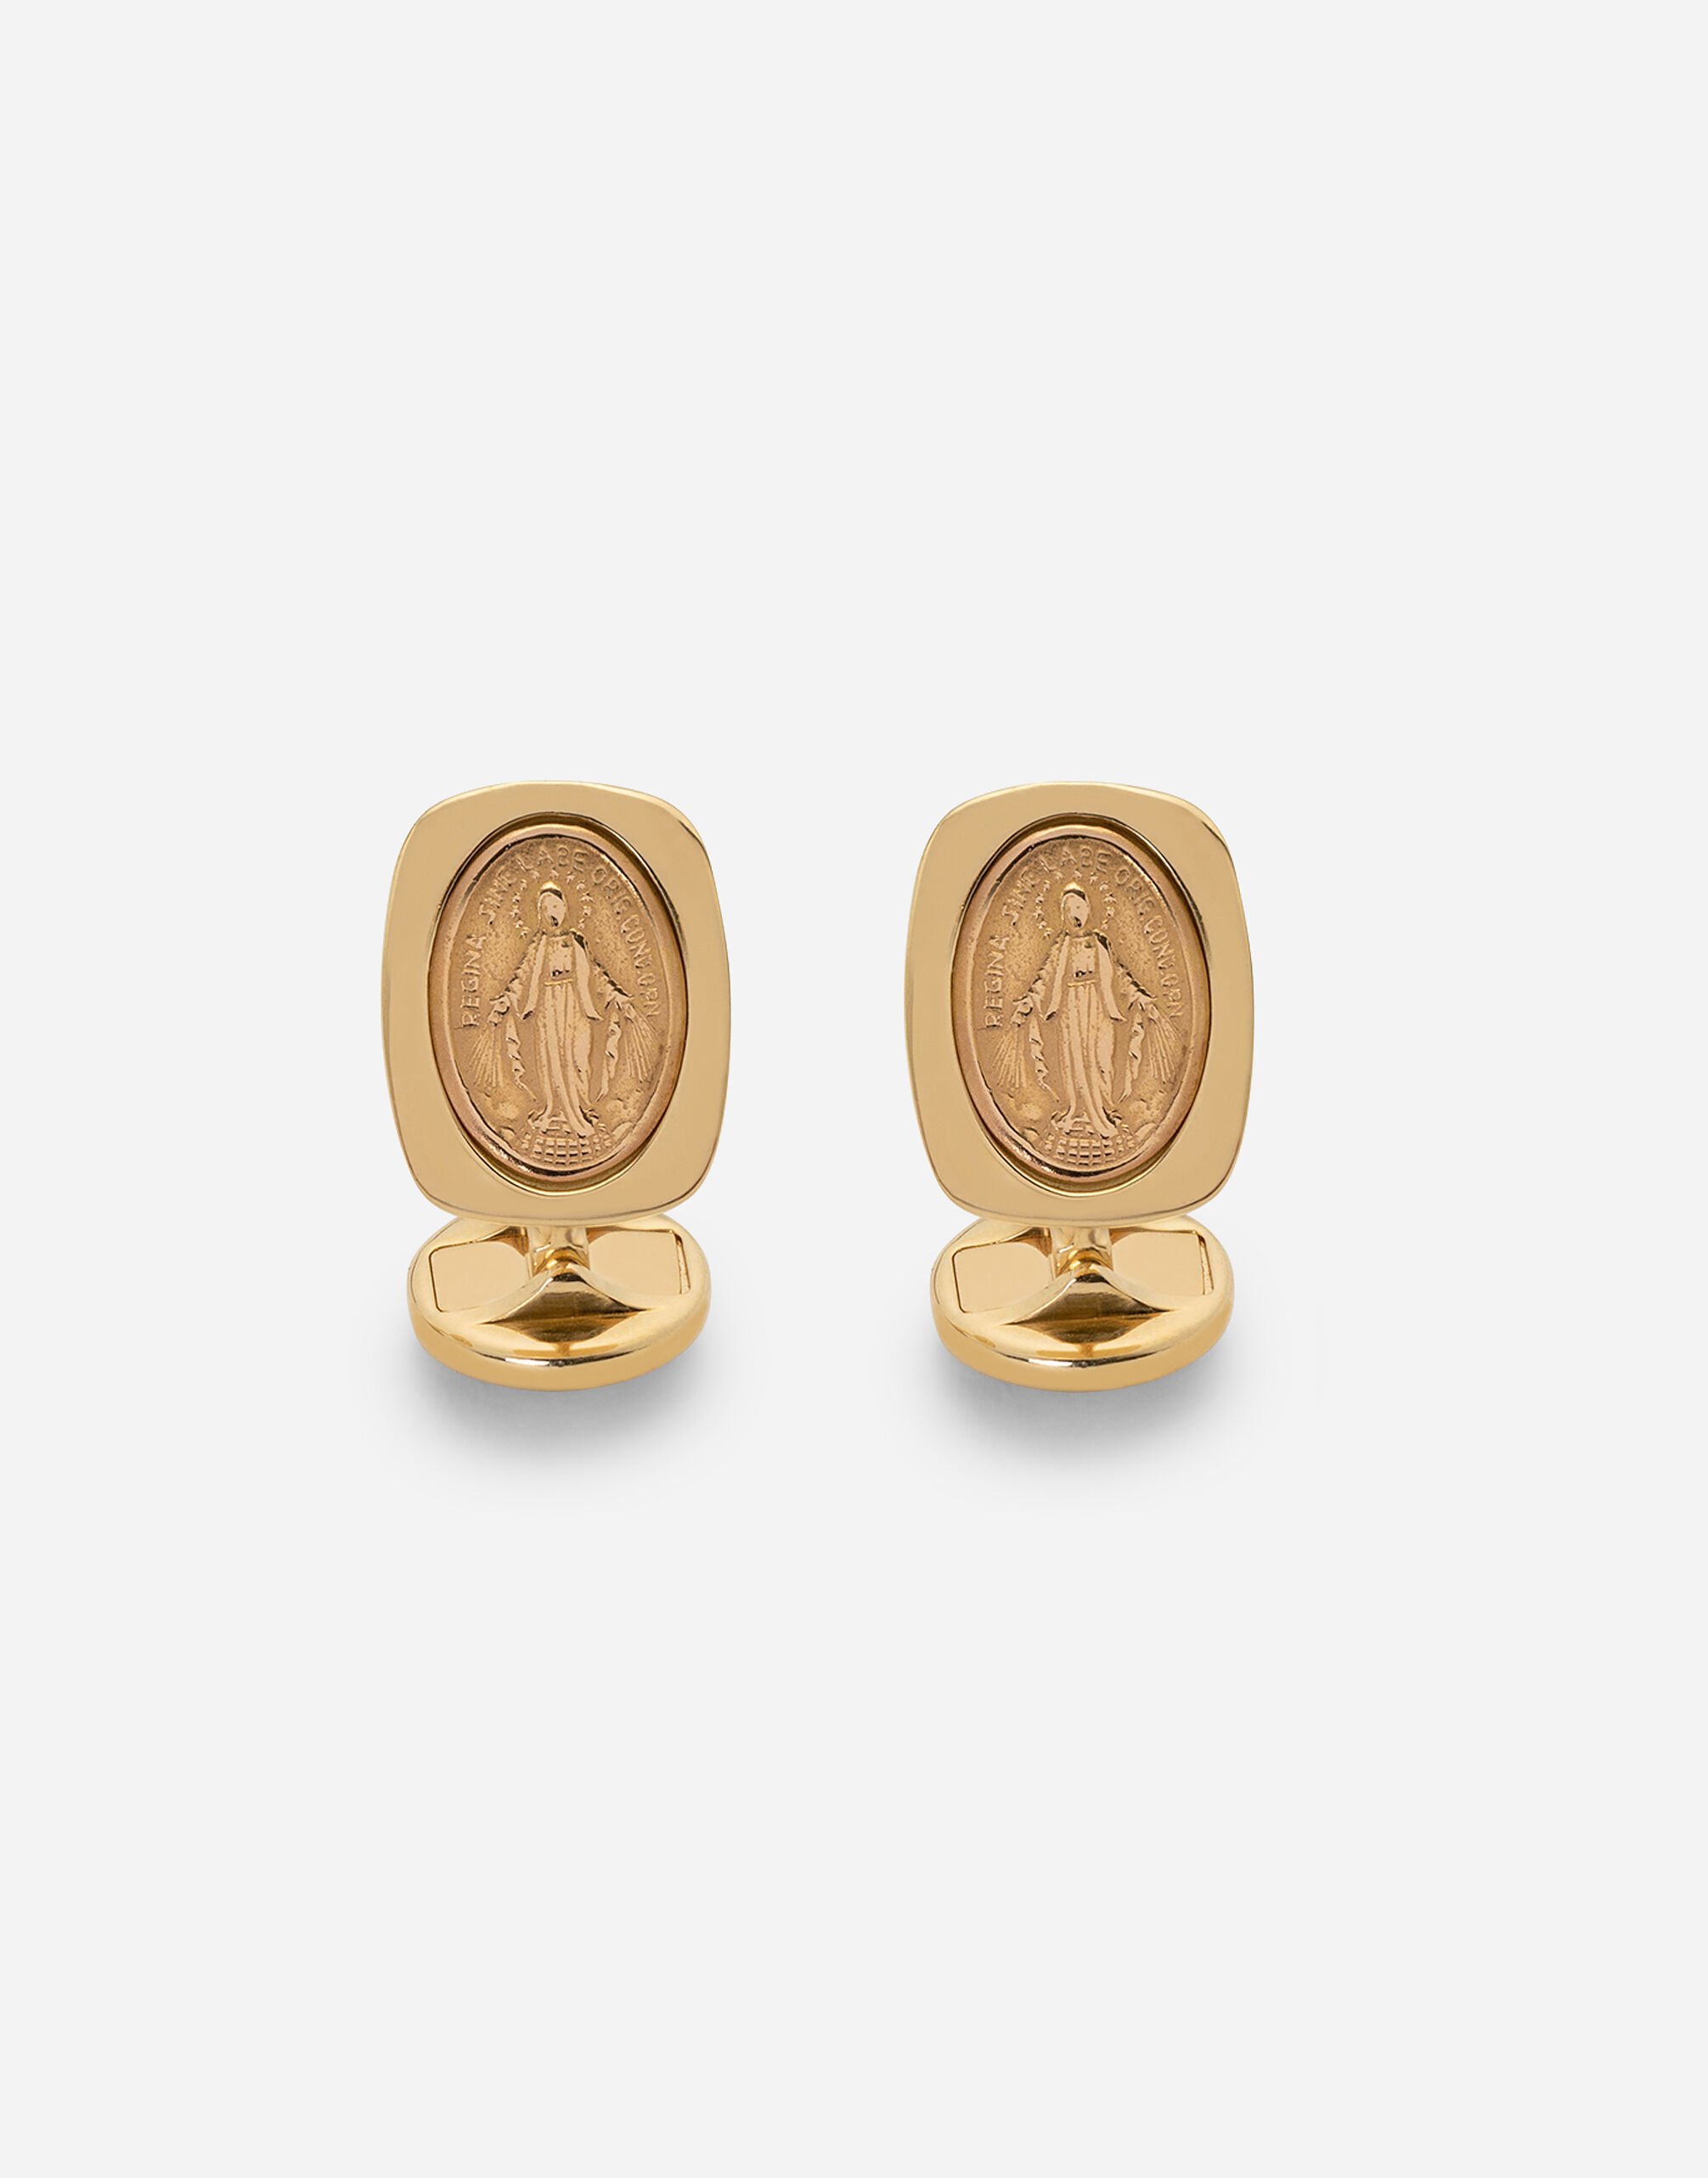 Dolce & Gabbana Devotion yellow gold cufflinks with a red gold Virgin Mary medallion Yellow gold WFHK1GWLAP1